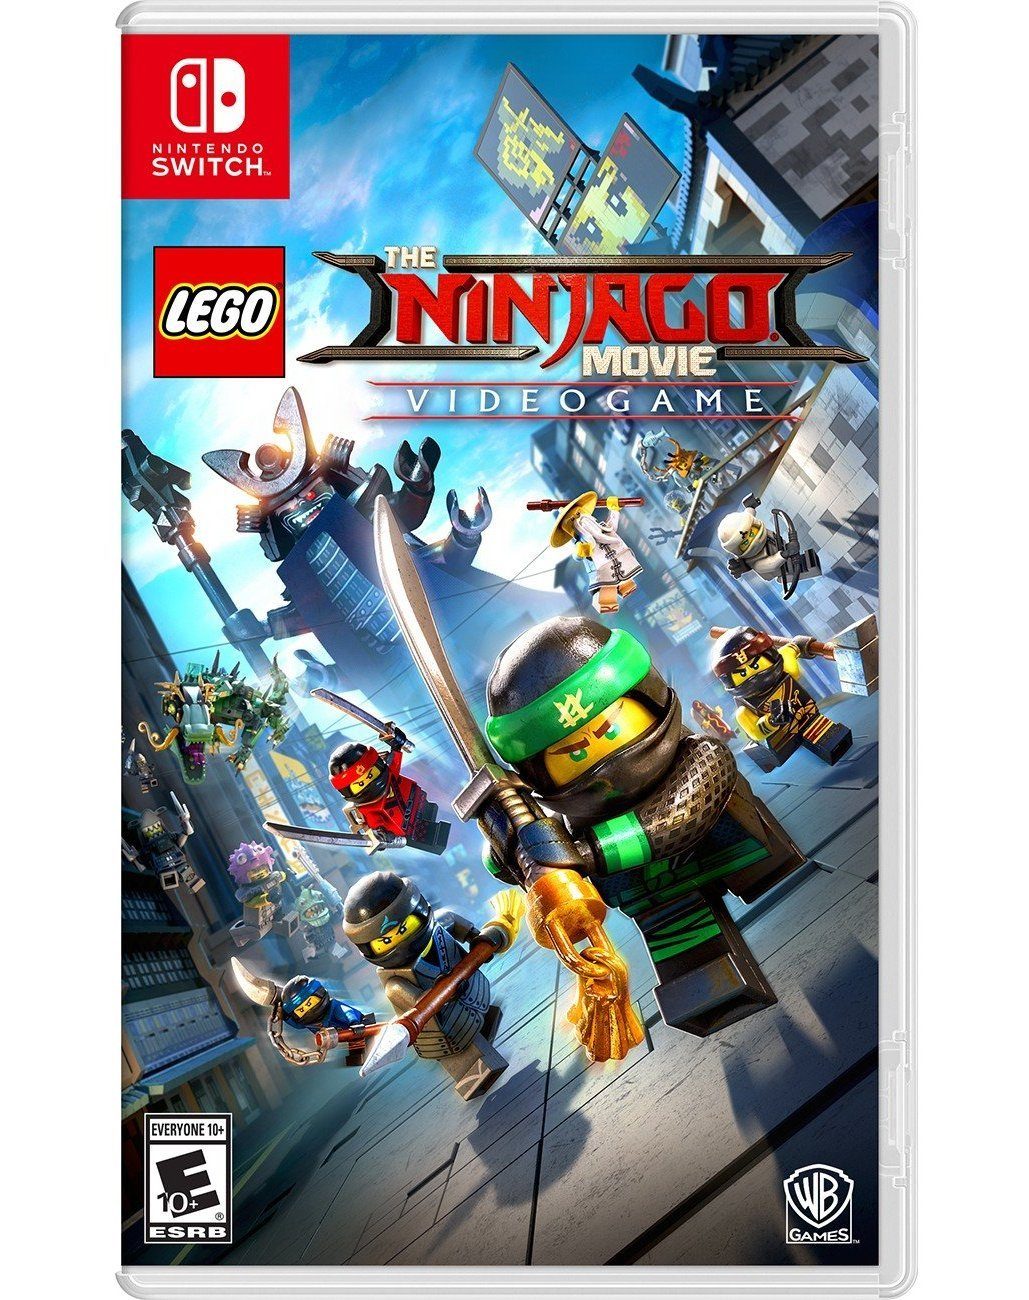 Lego The Ninjago Movie Video Game For Nintendo Switch